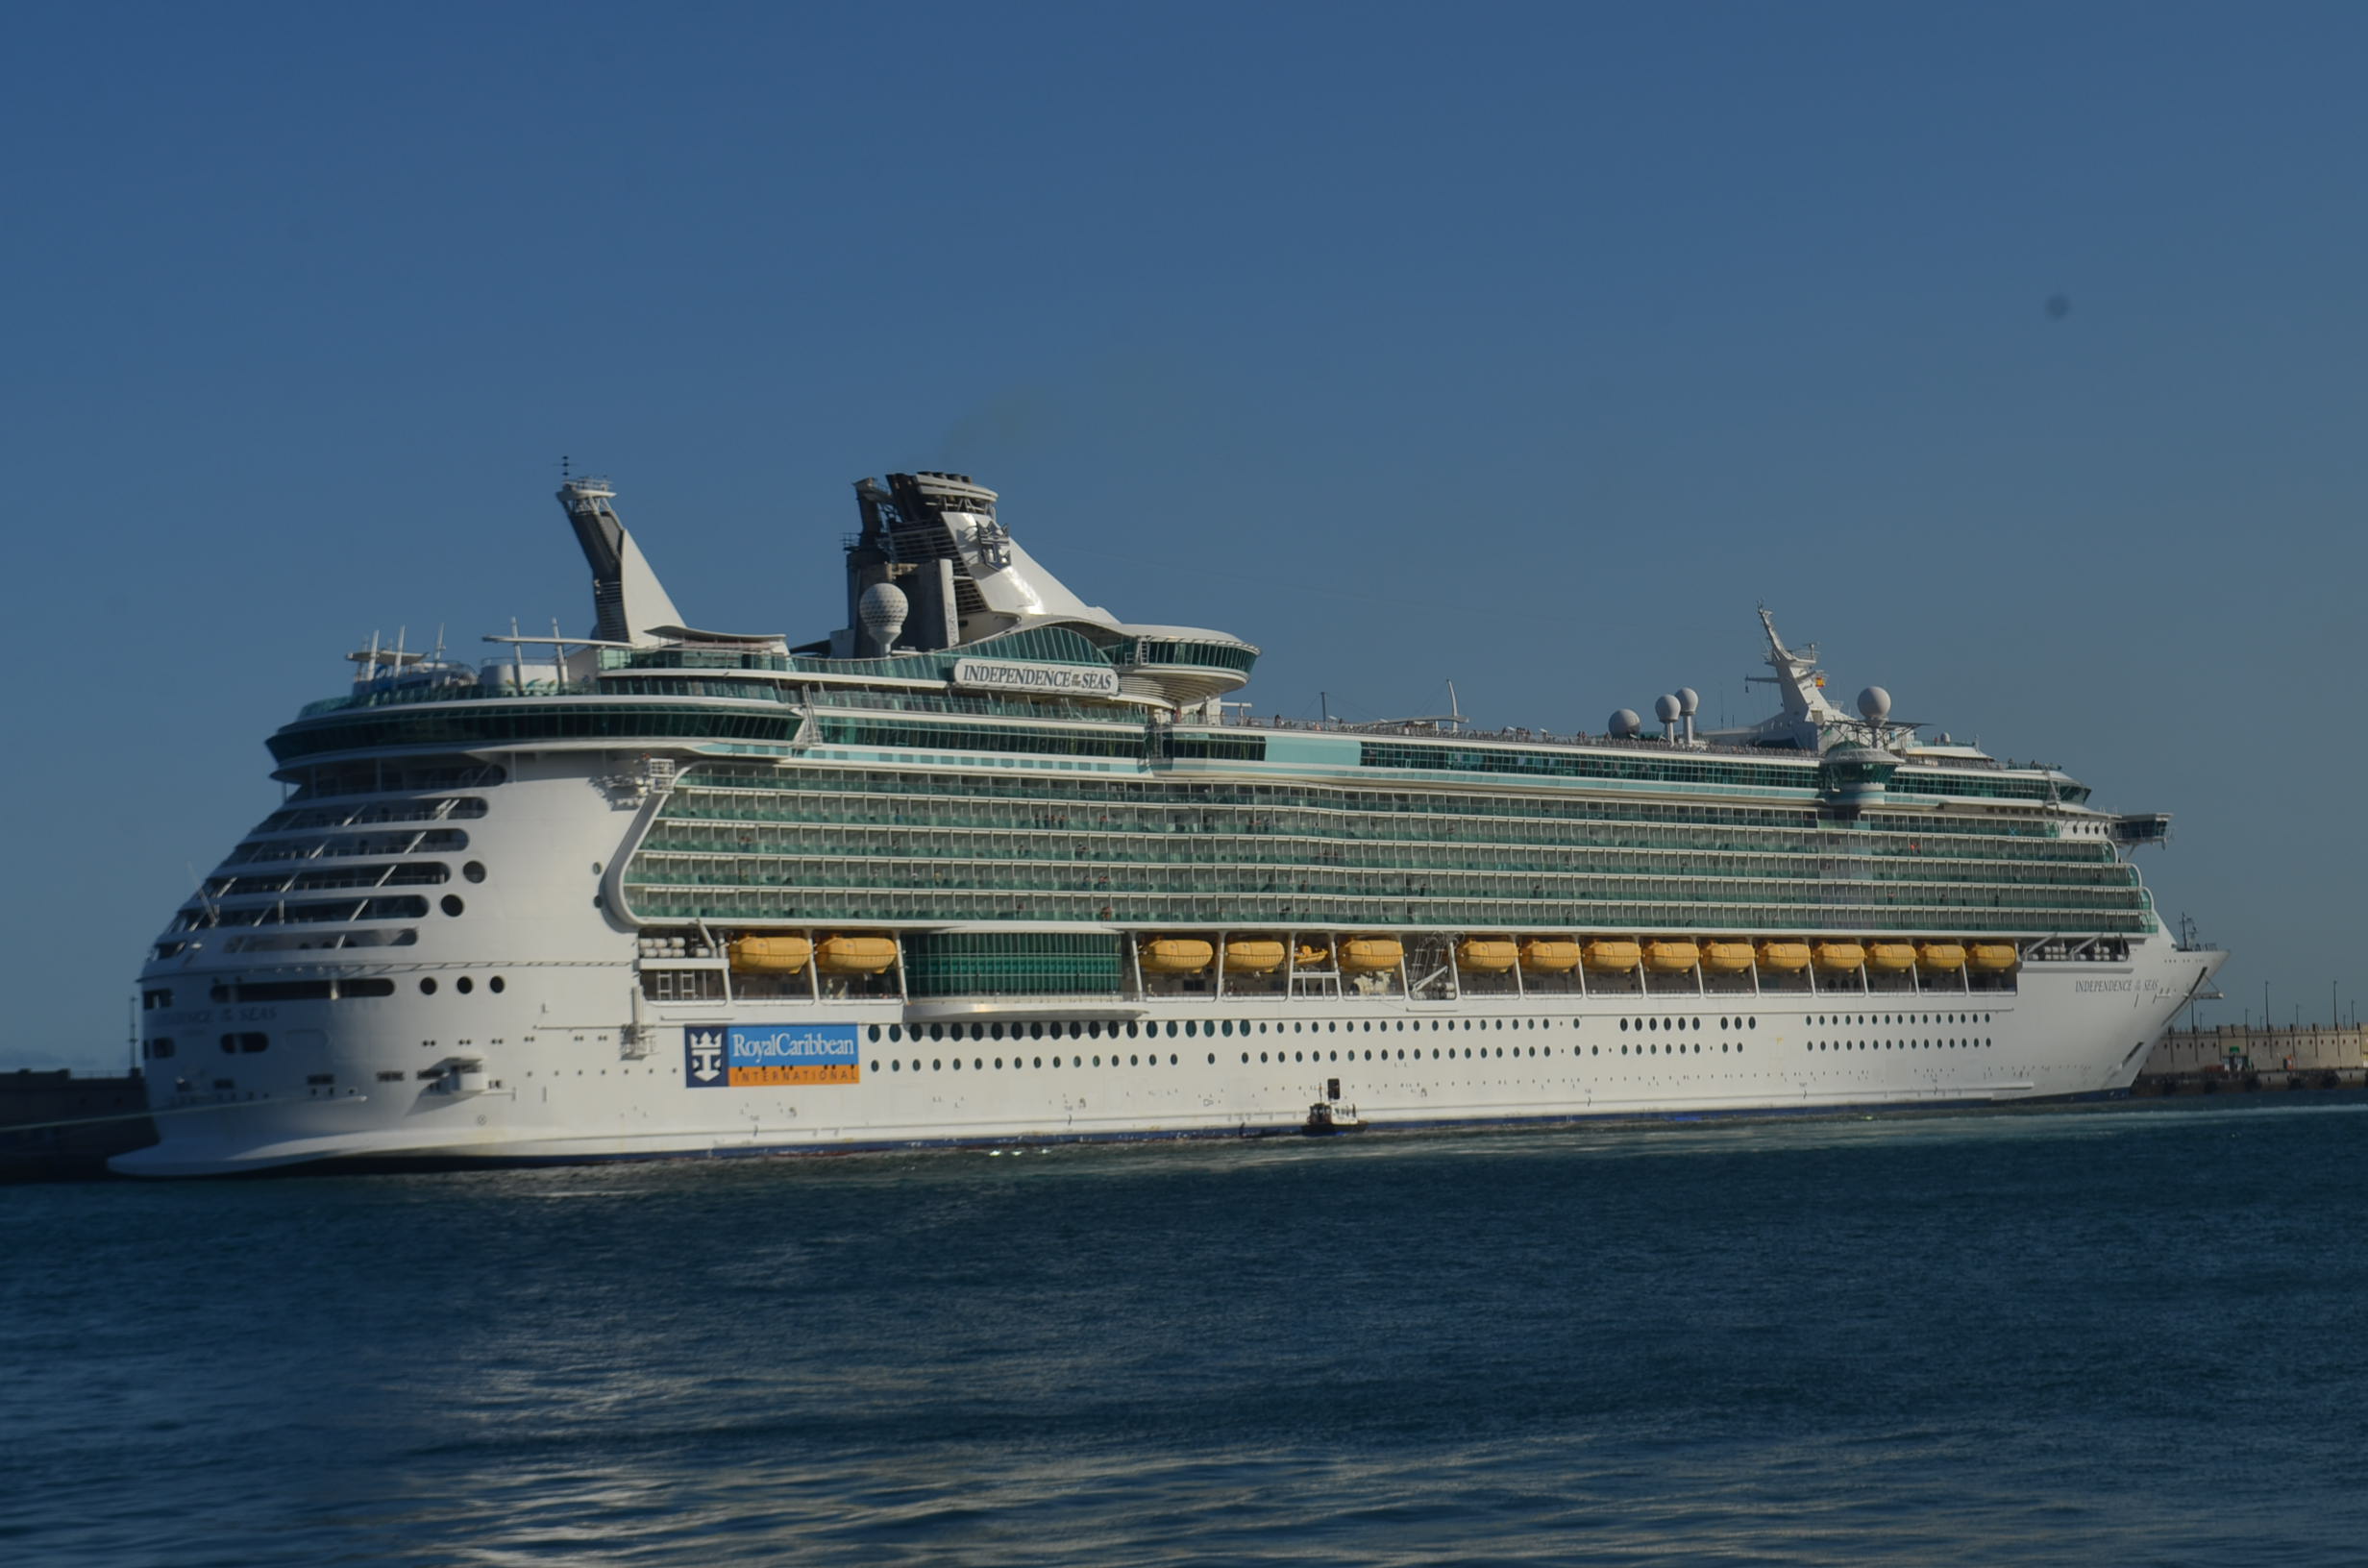 INDEPENDENCE OF THE SEAS S.C. Tenerife, 13-09-2016 (5)